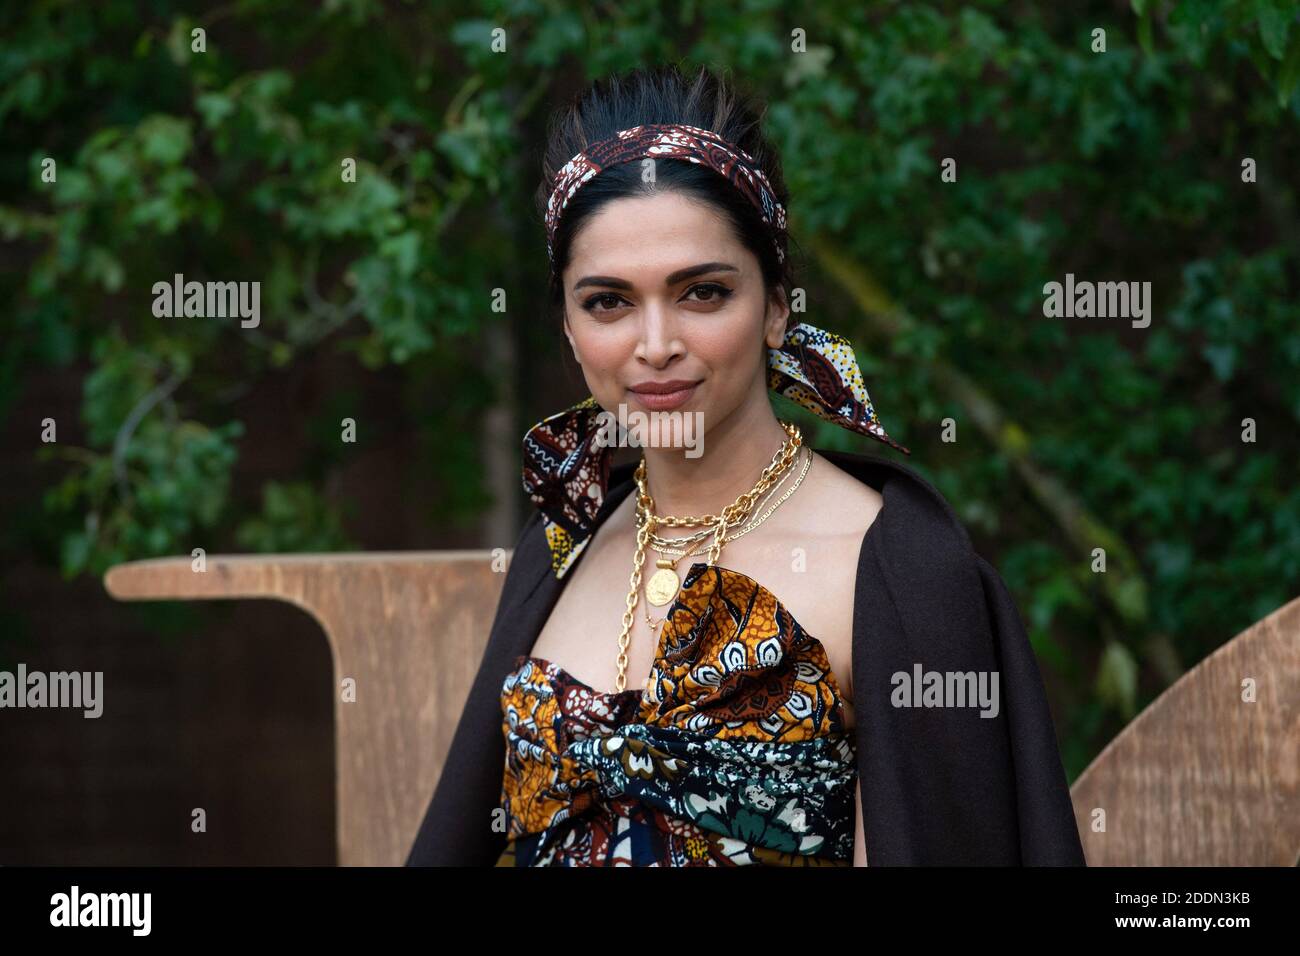 Deepika Padukone attending the Christian Dior Womenswear Spring/Summer 2020  show as part of Paris Fashion Week in Paris, France on September 24, 2019.  Photo by Aurore Marechal/ABACAPRESS.COM Stock Photo - Alamy